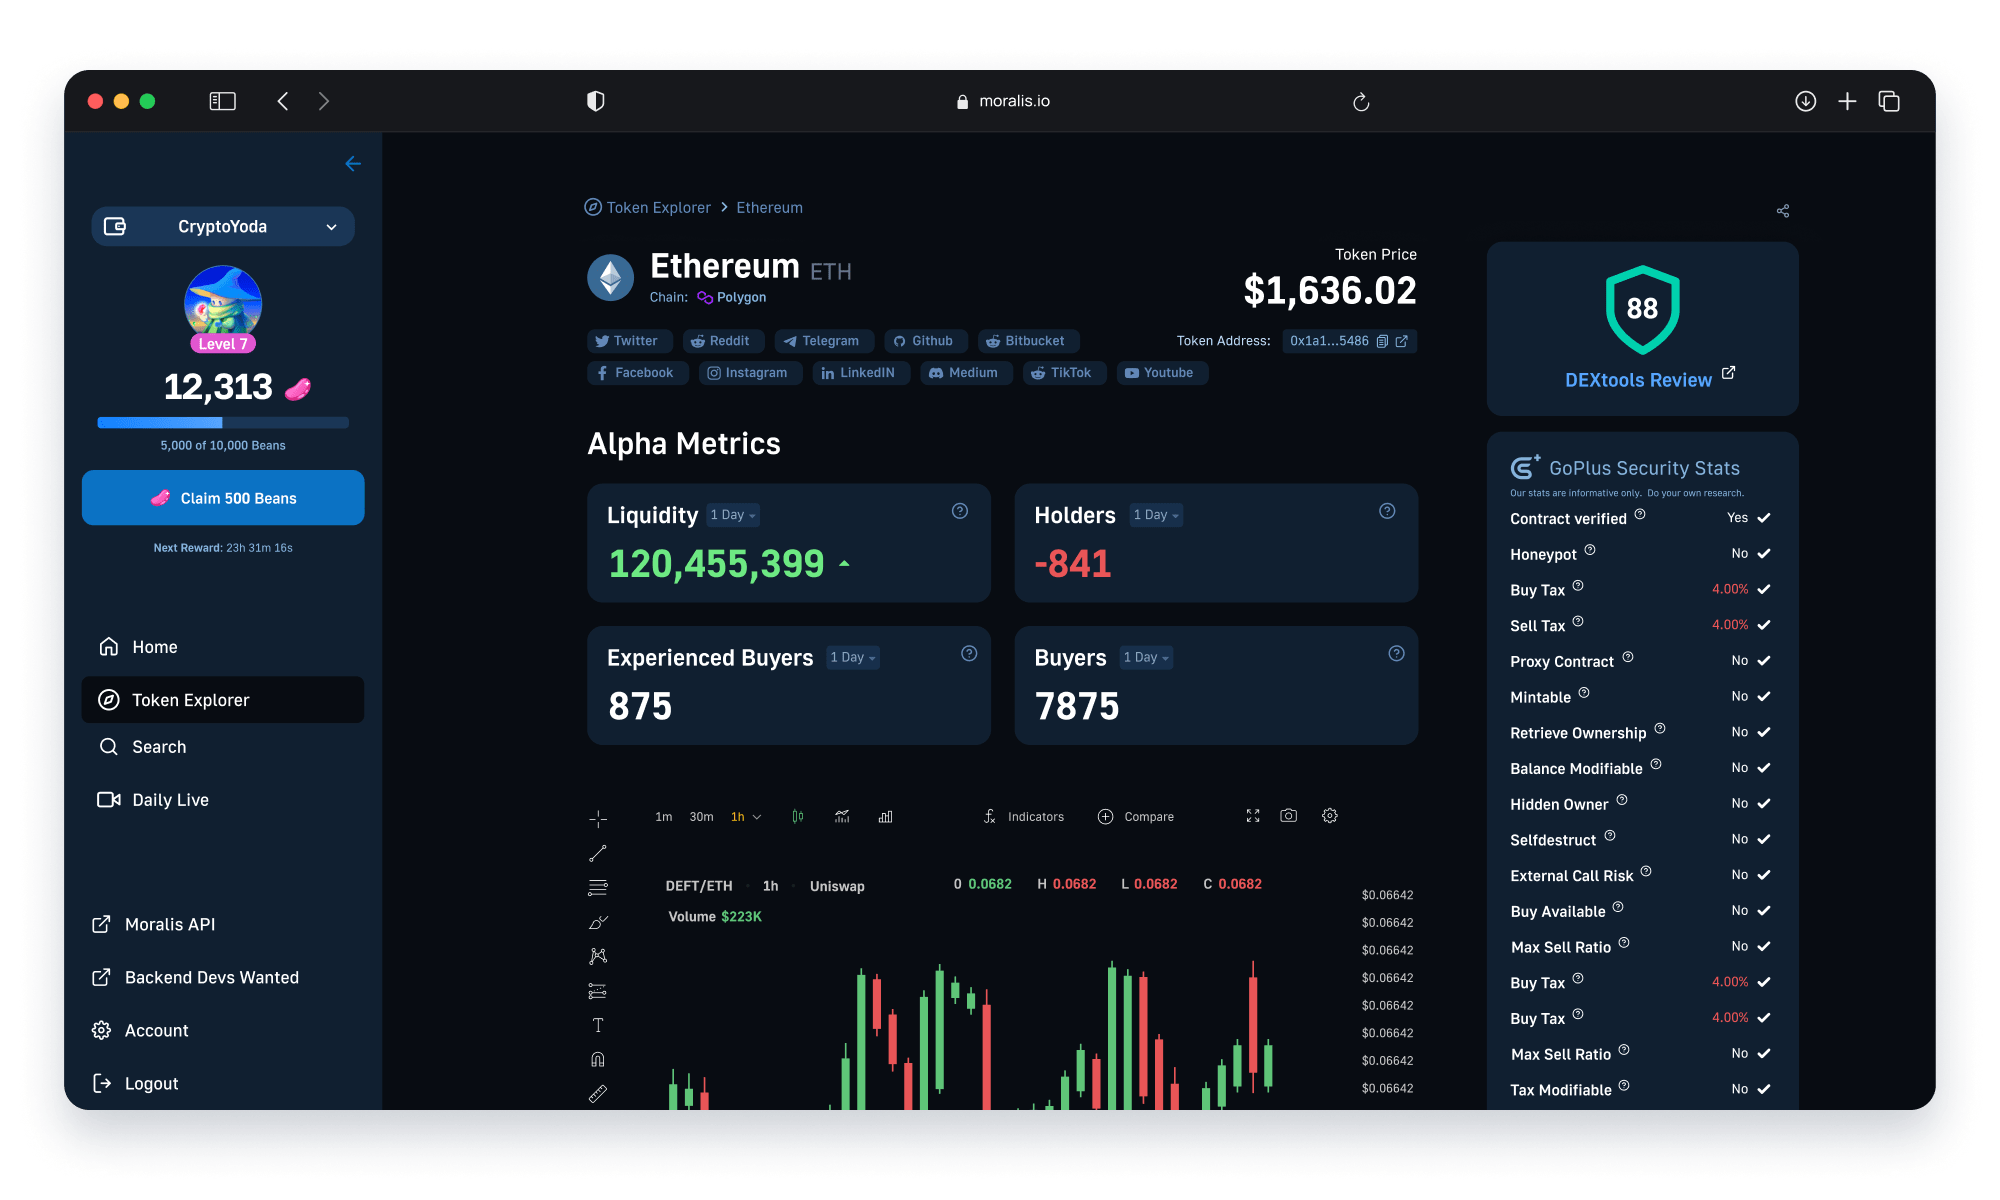 Moralis Money UI Example - Showing what data you can query Ethereum with using Moralis